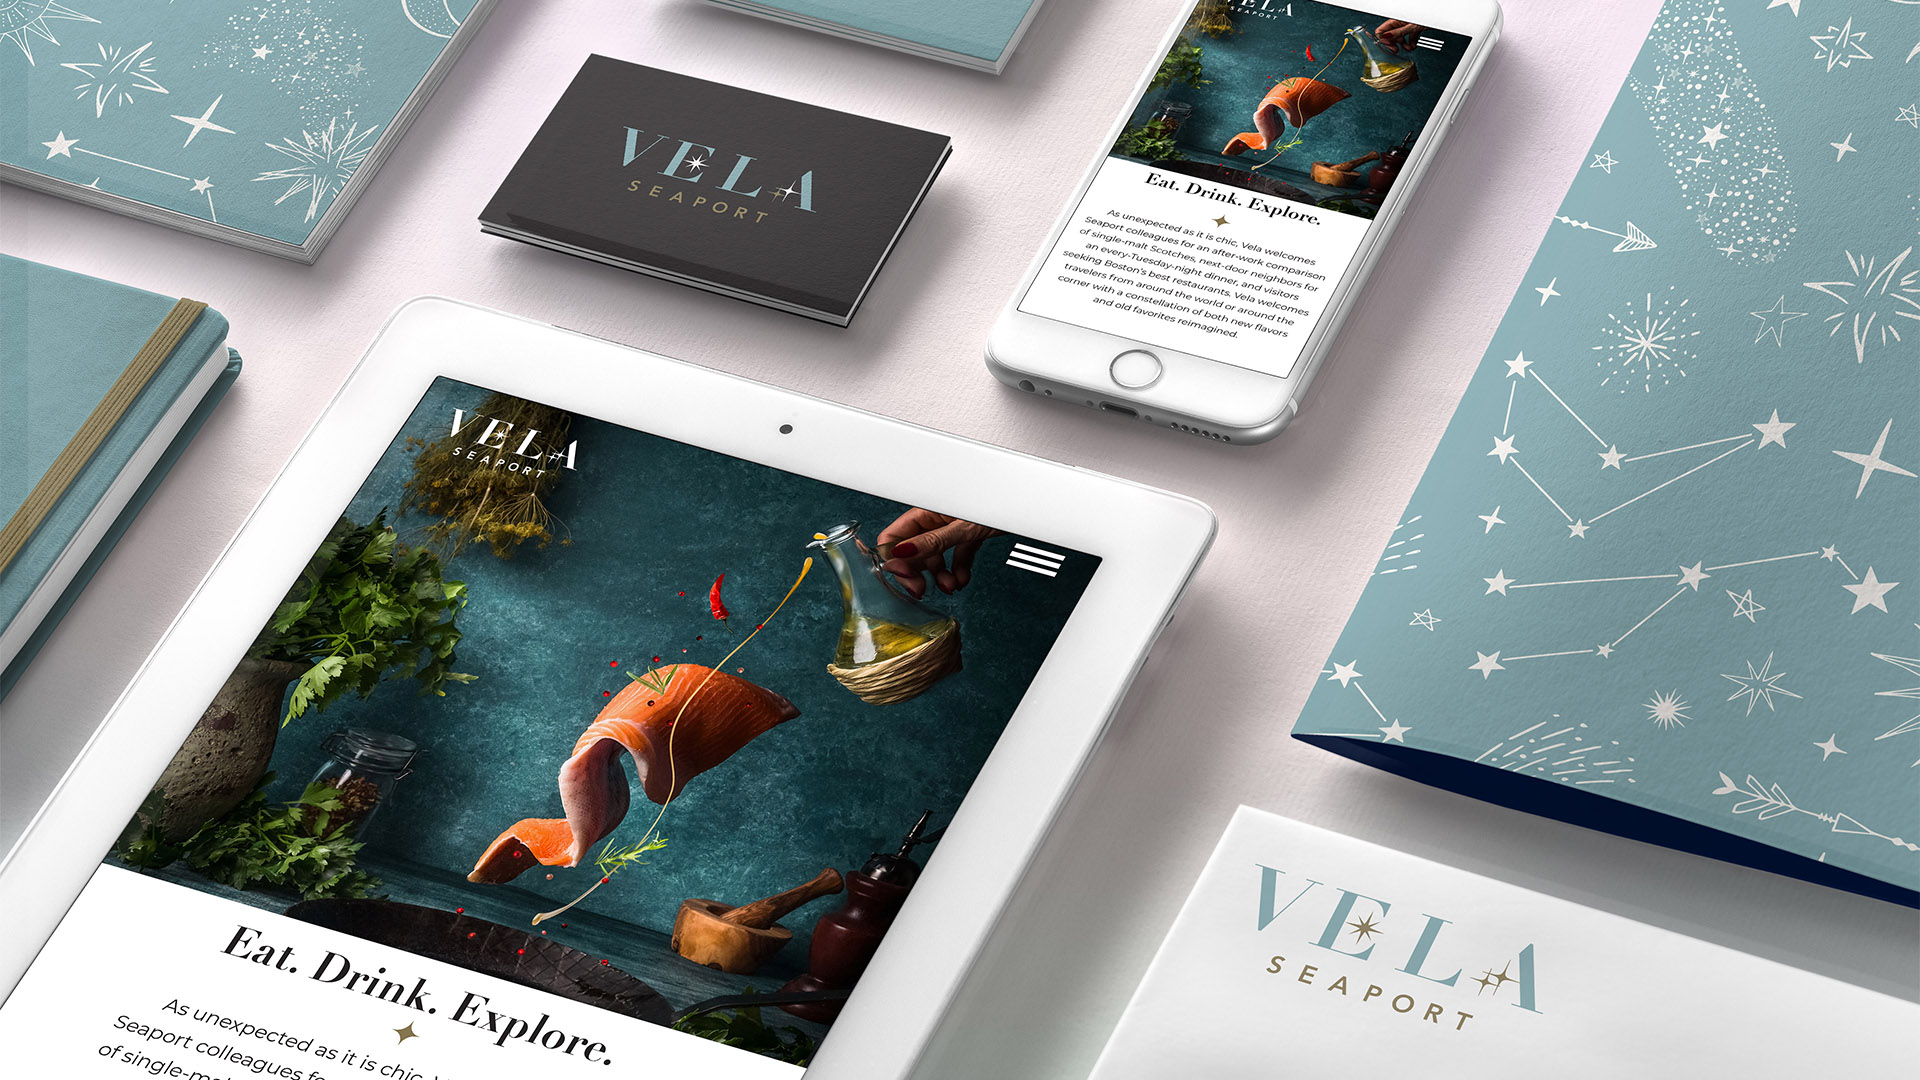 vela seaport iphone and ipad with business card